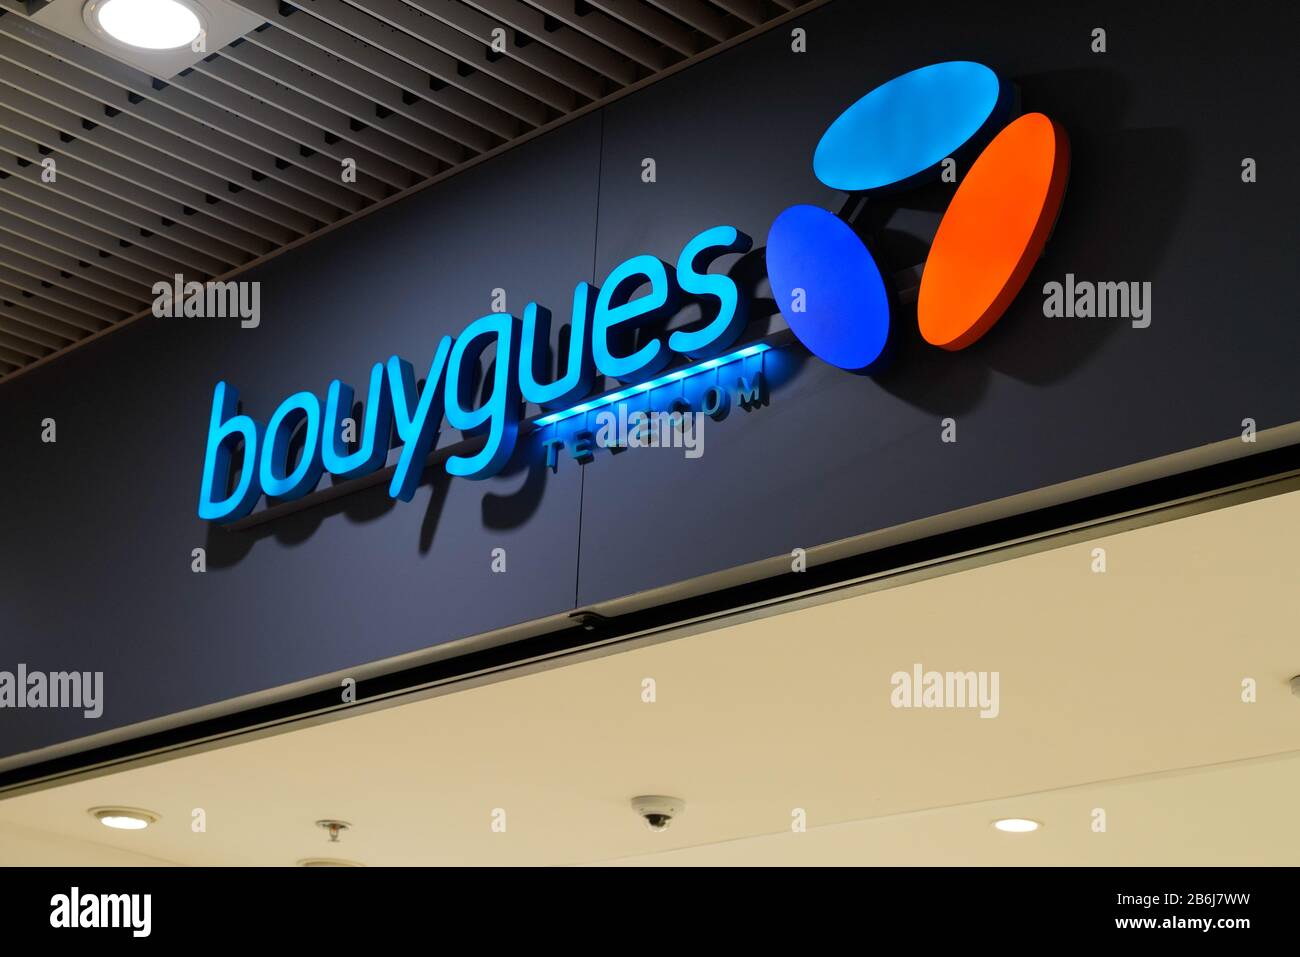 Bordeaux , Aquitaine / France - 11 20 2019 : Bouygues telecom shop sign logo phone operator store french Stock Photo